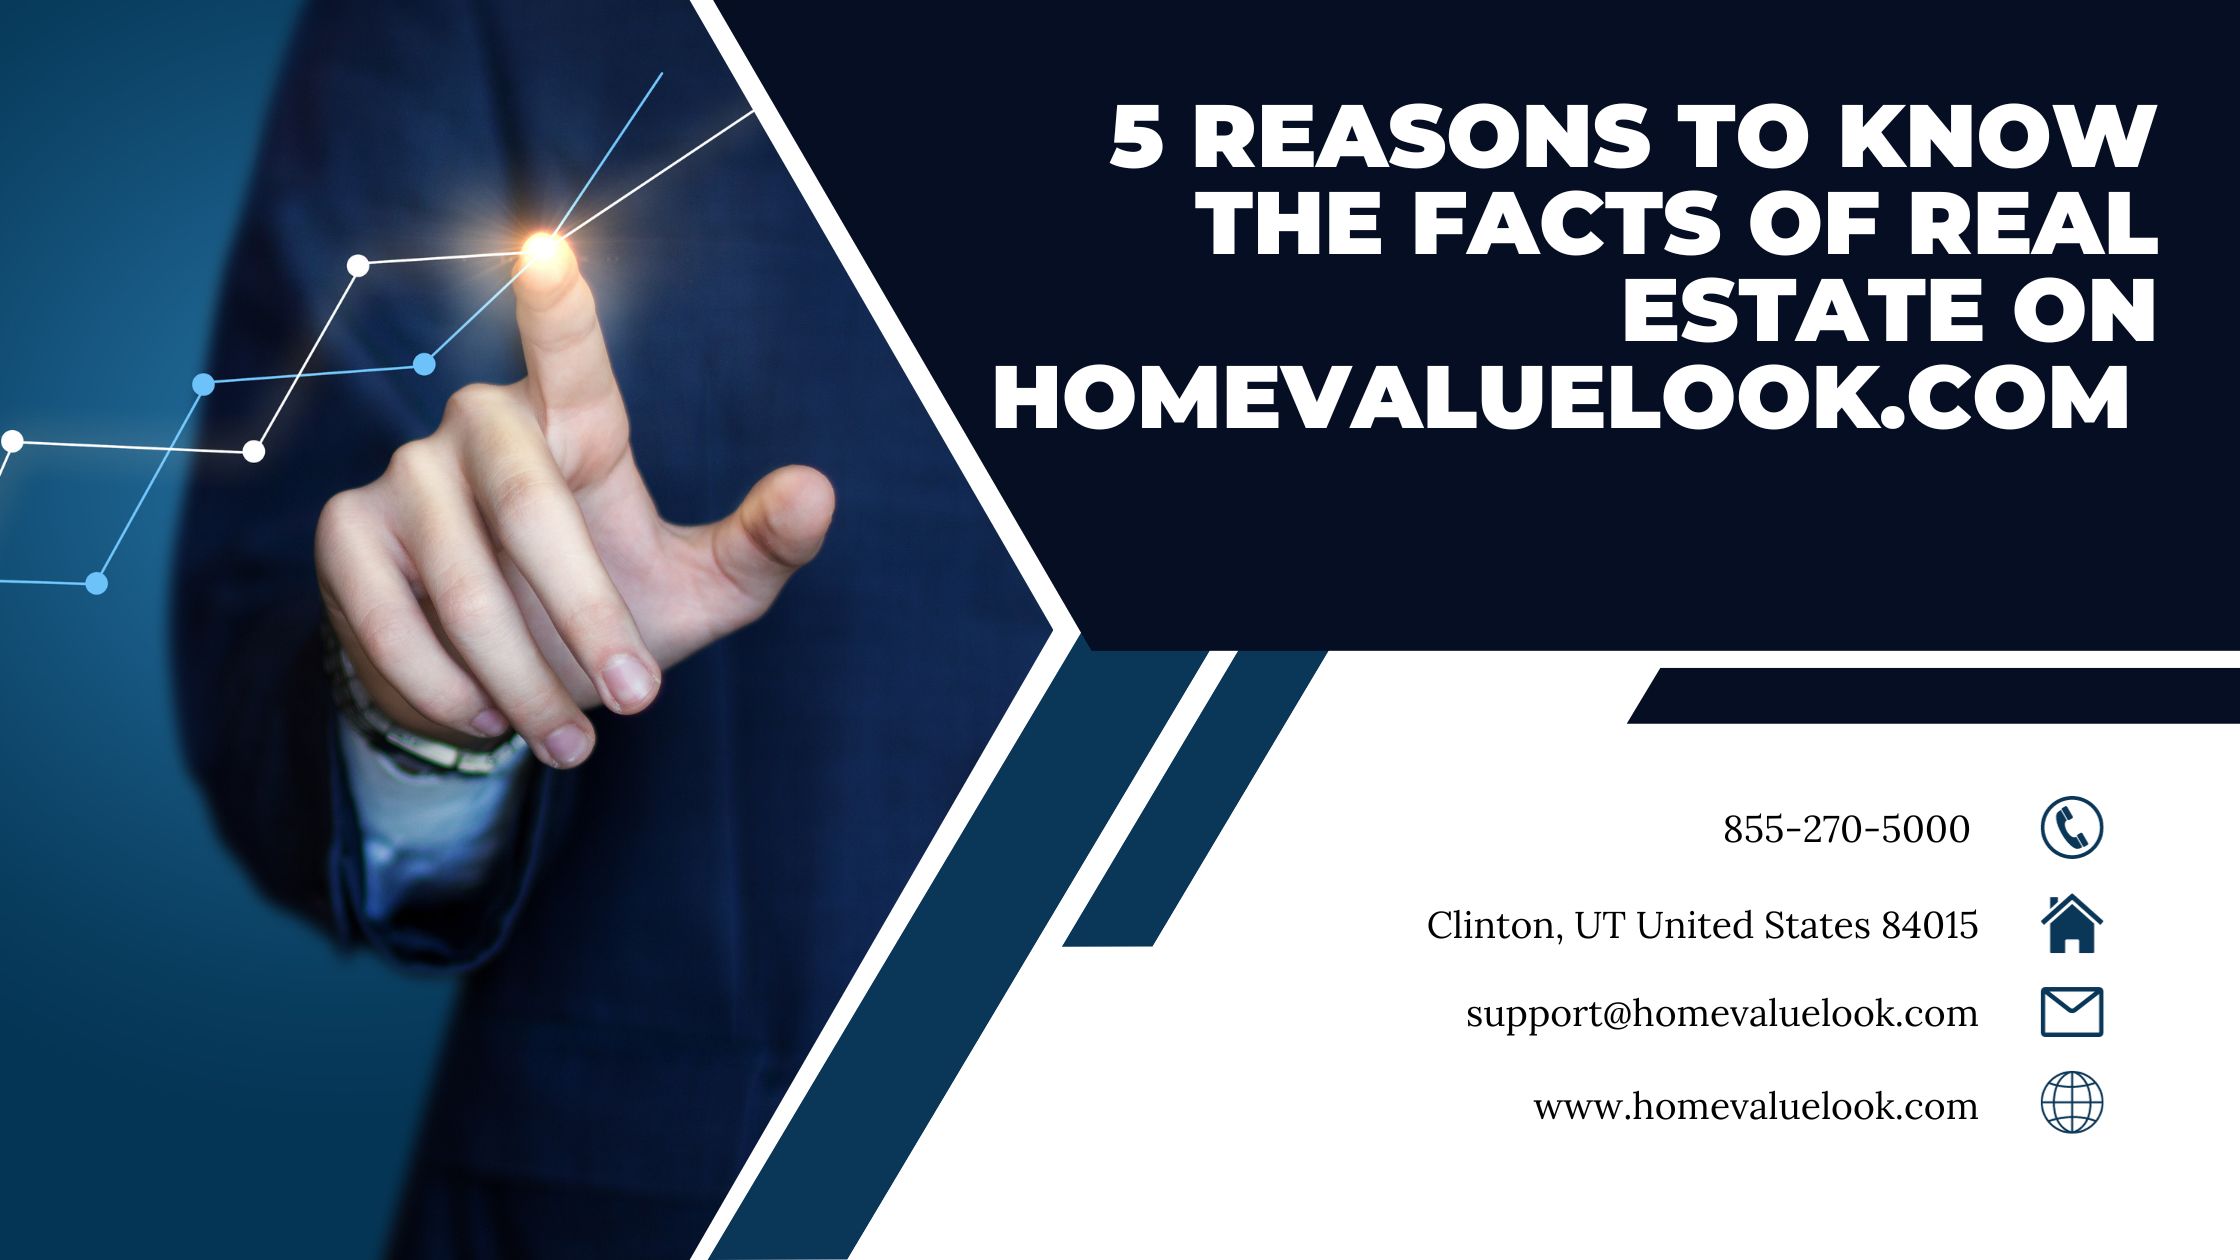 5 Reasons To Know The Facts Of Real Estate On Homevaluelook.com – HomeValueLook.com